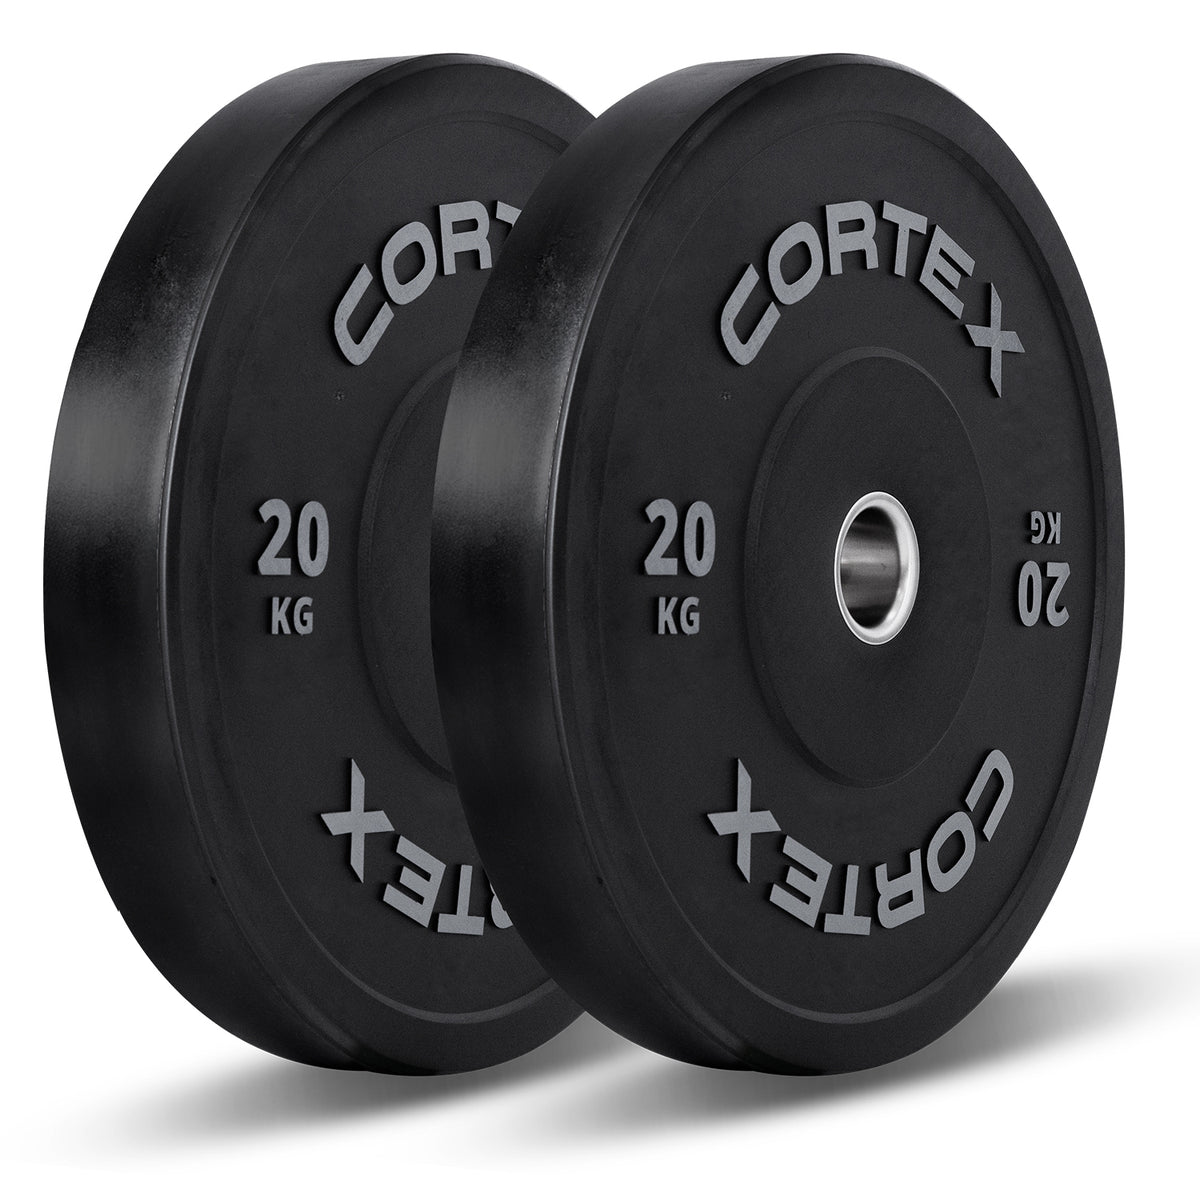 CORTEX SR3 Squat Rack with 100kg Olympic Bumper (V2) Weight, Bar and Bench Set